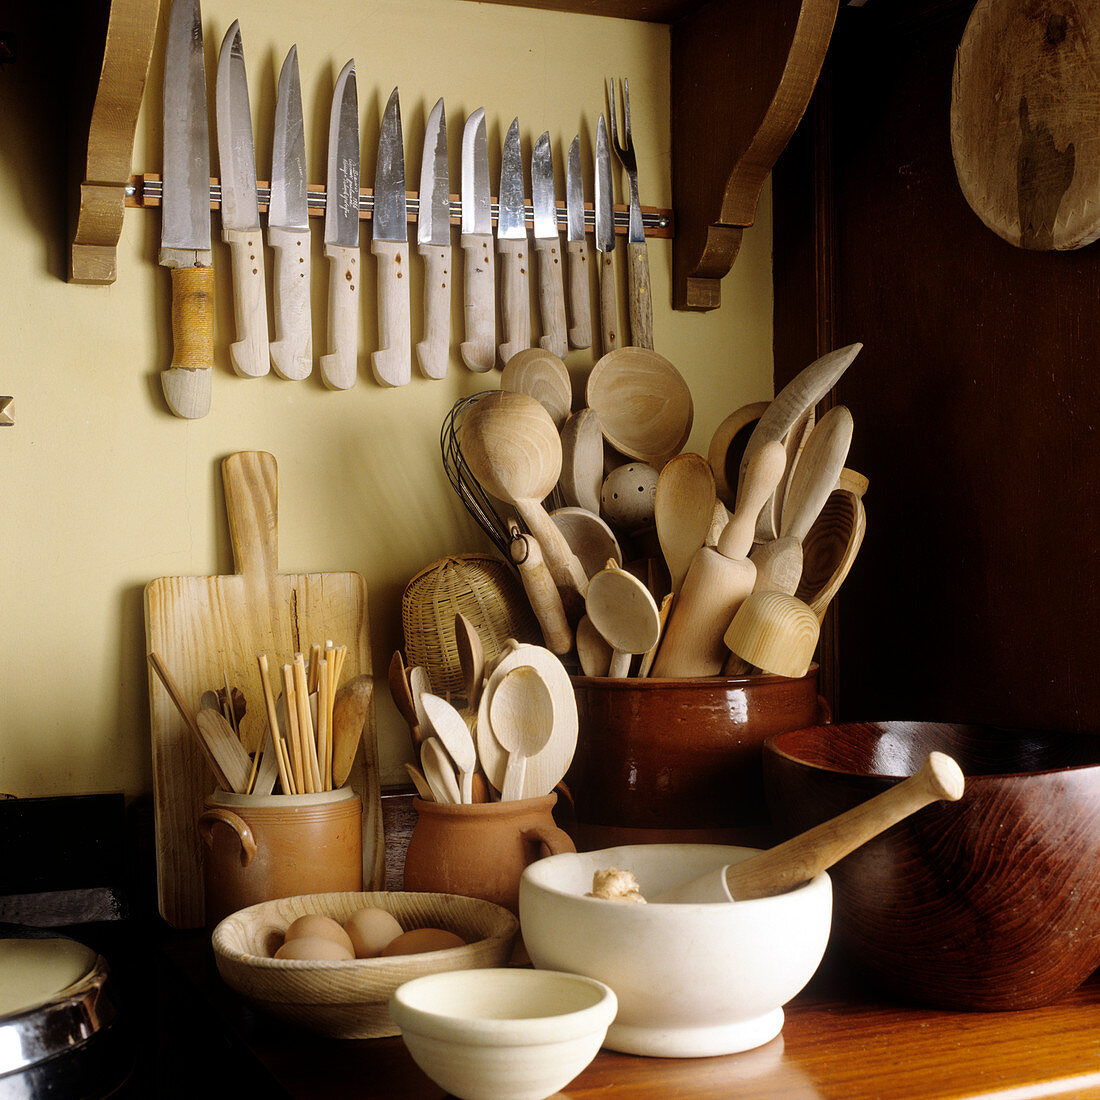 Various cooking utensils made from natural materials such as wooden spoons in ceramic pot and set of knives hanging on the wall